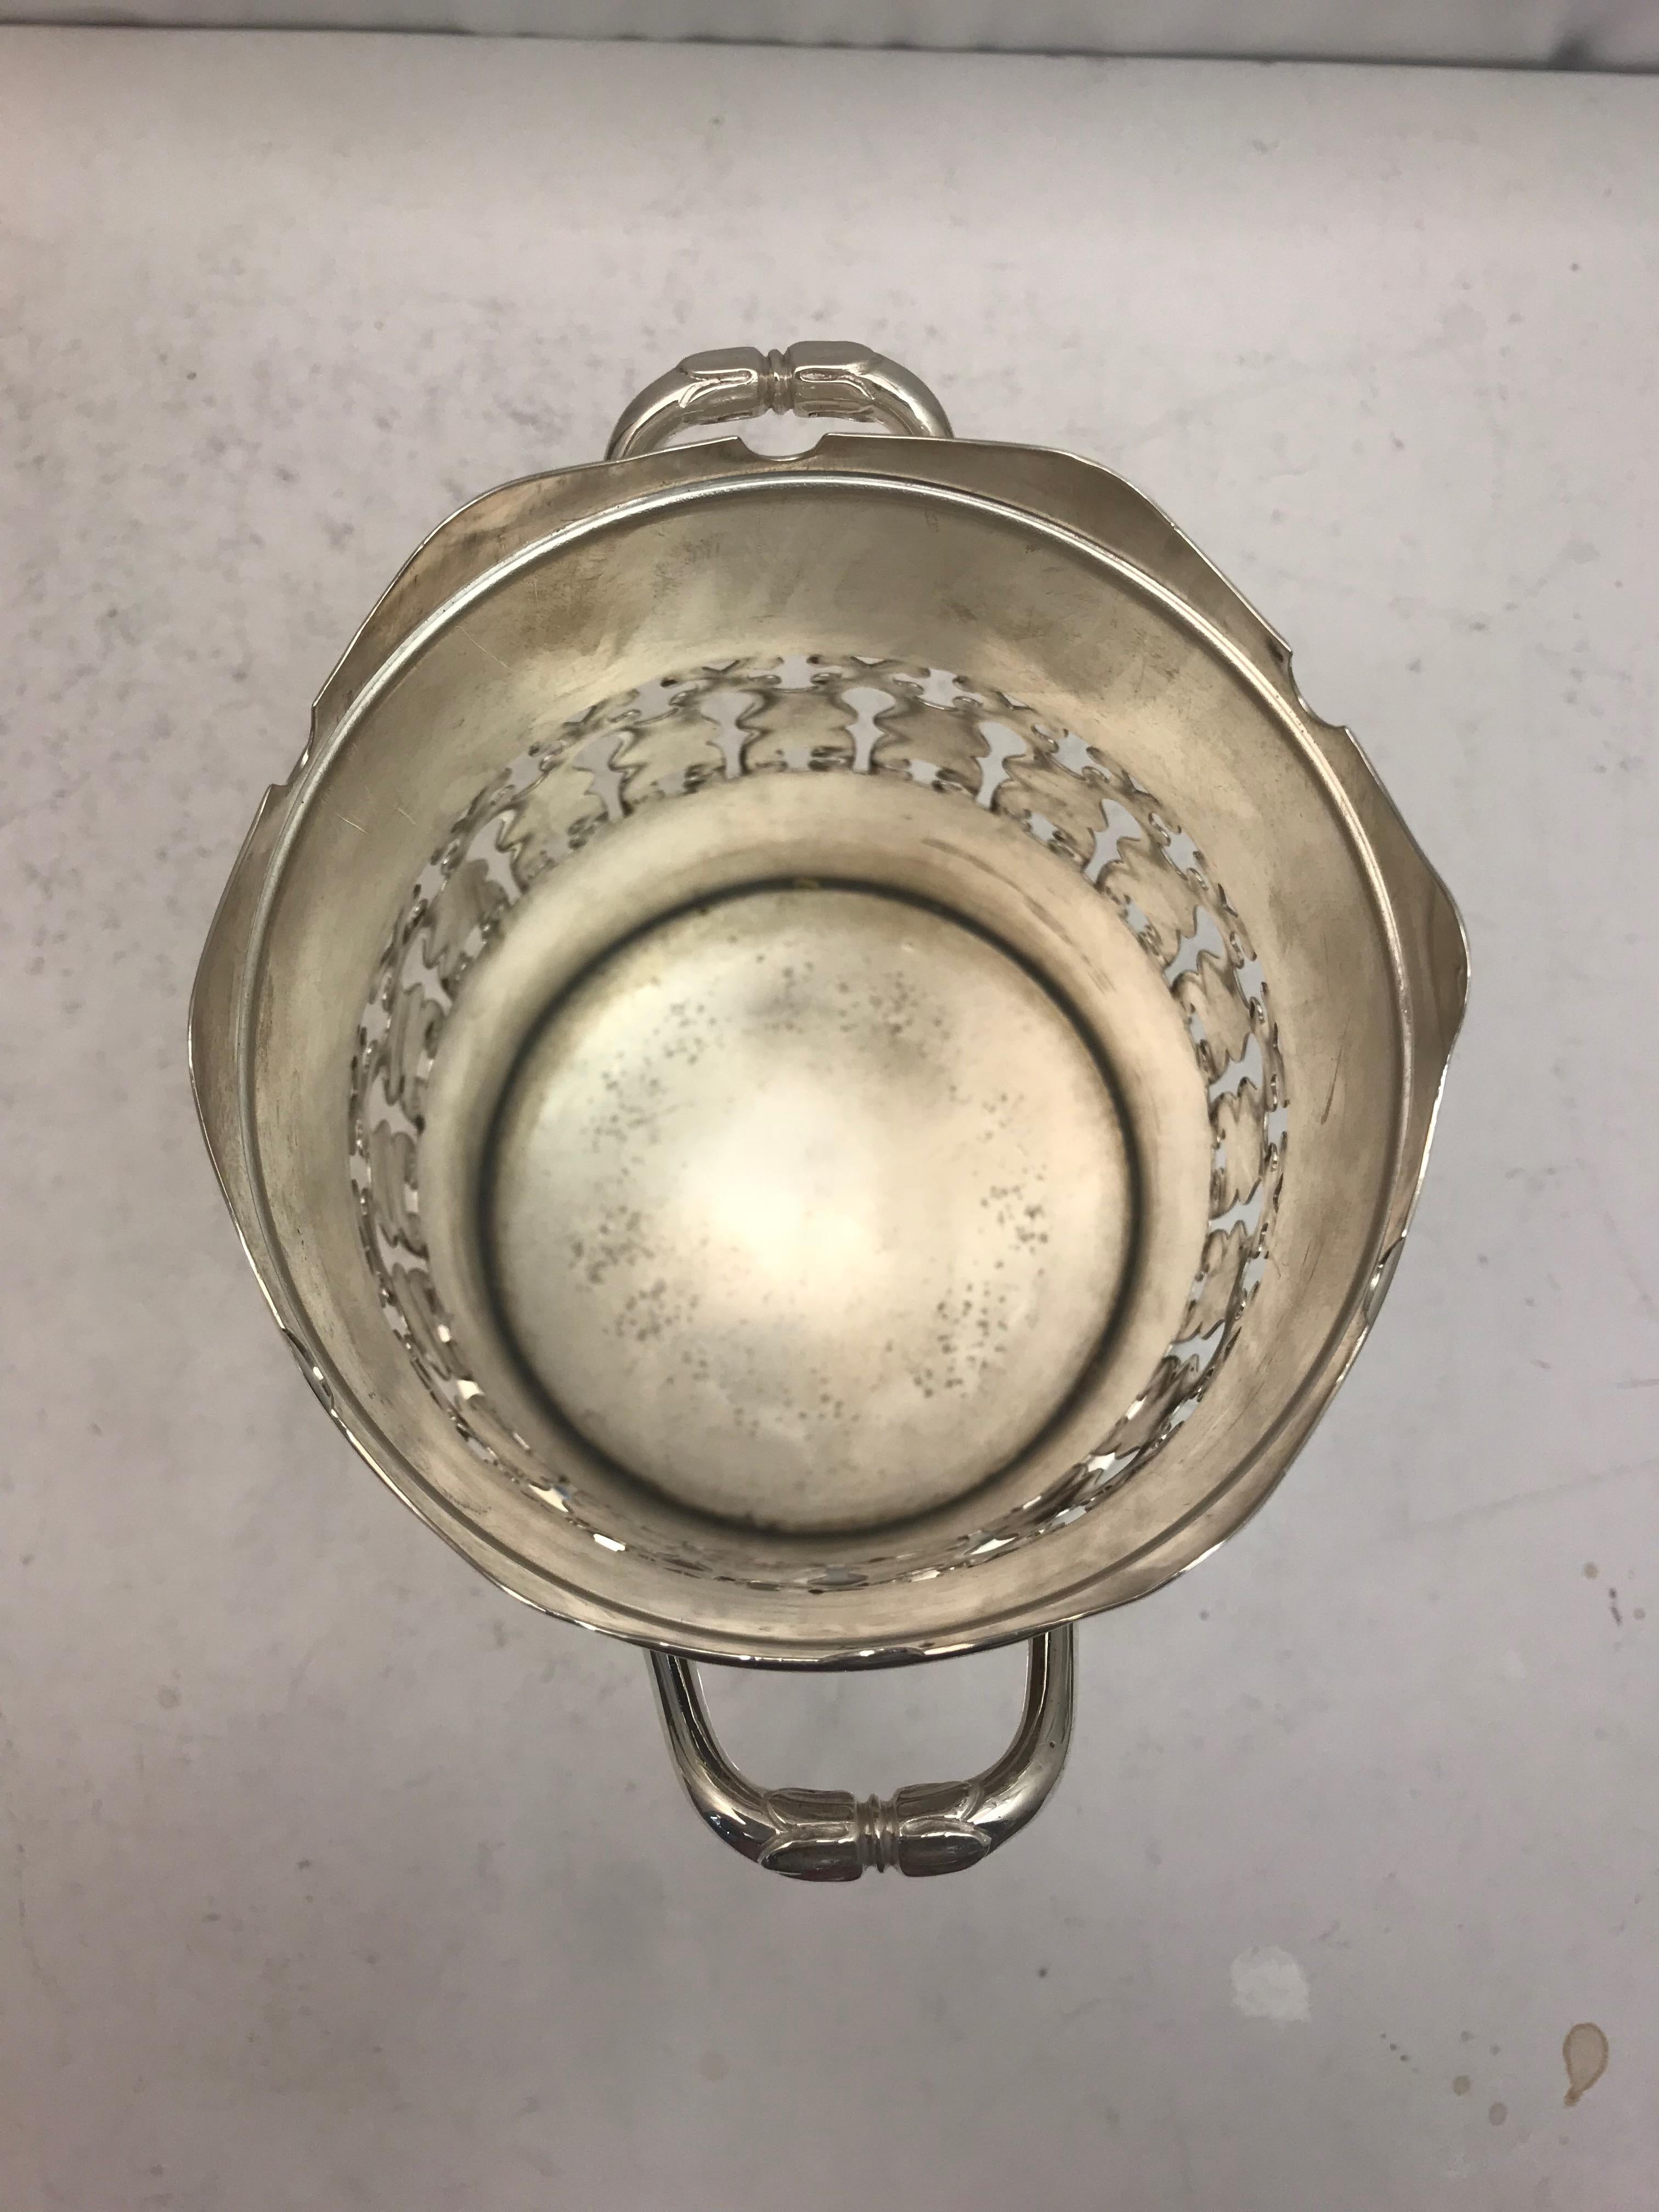 An two handled antique silver plate pierced wine bottle holder. Fully hallmarked. Made in 1900.
 